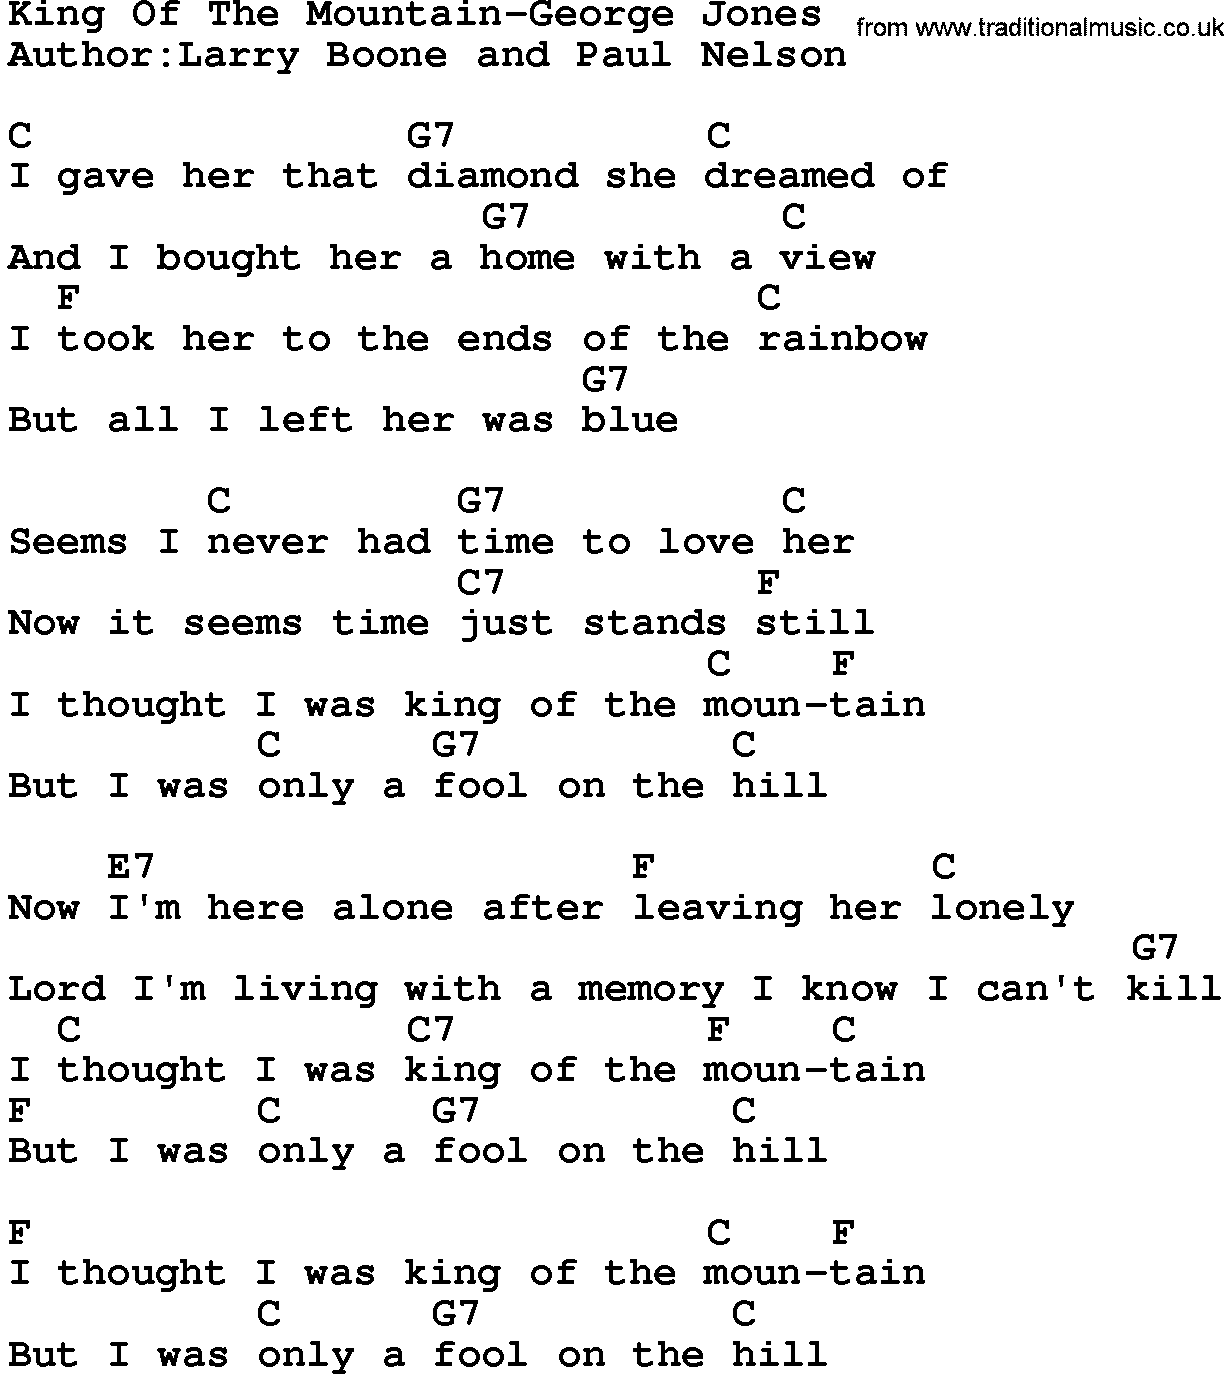 Country music song: King Of The Mountain-George Jones lyrics and chords